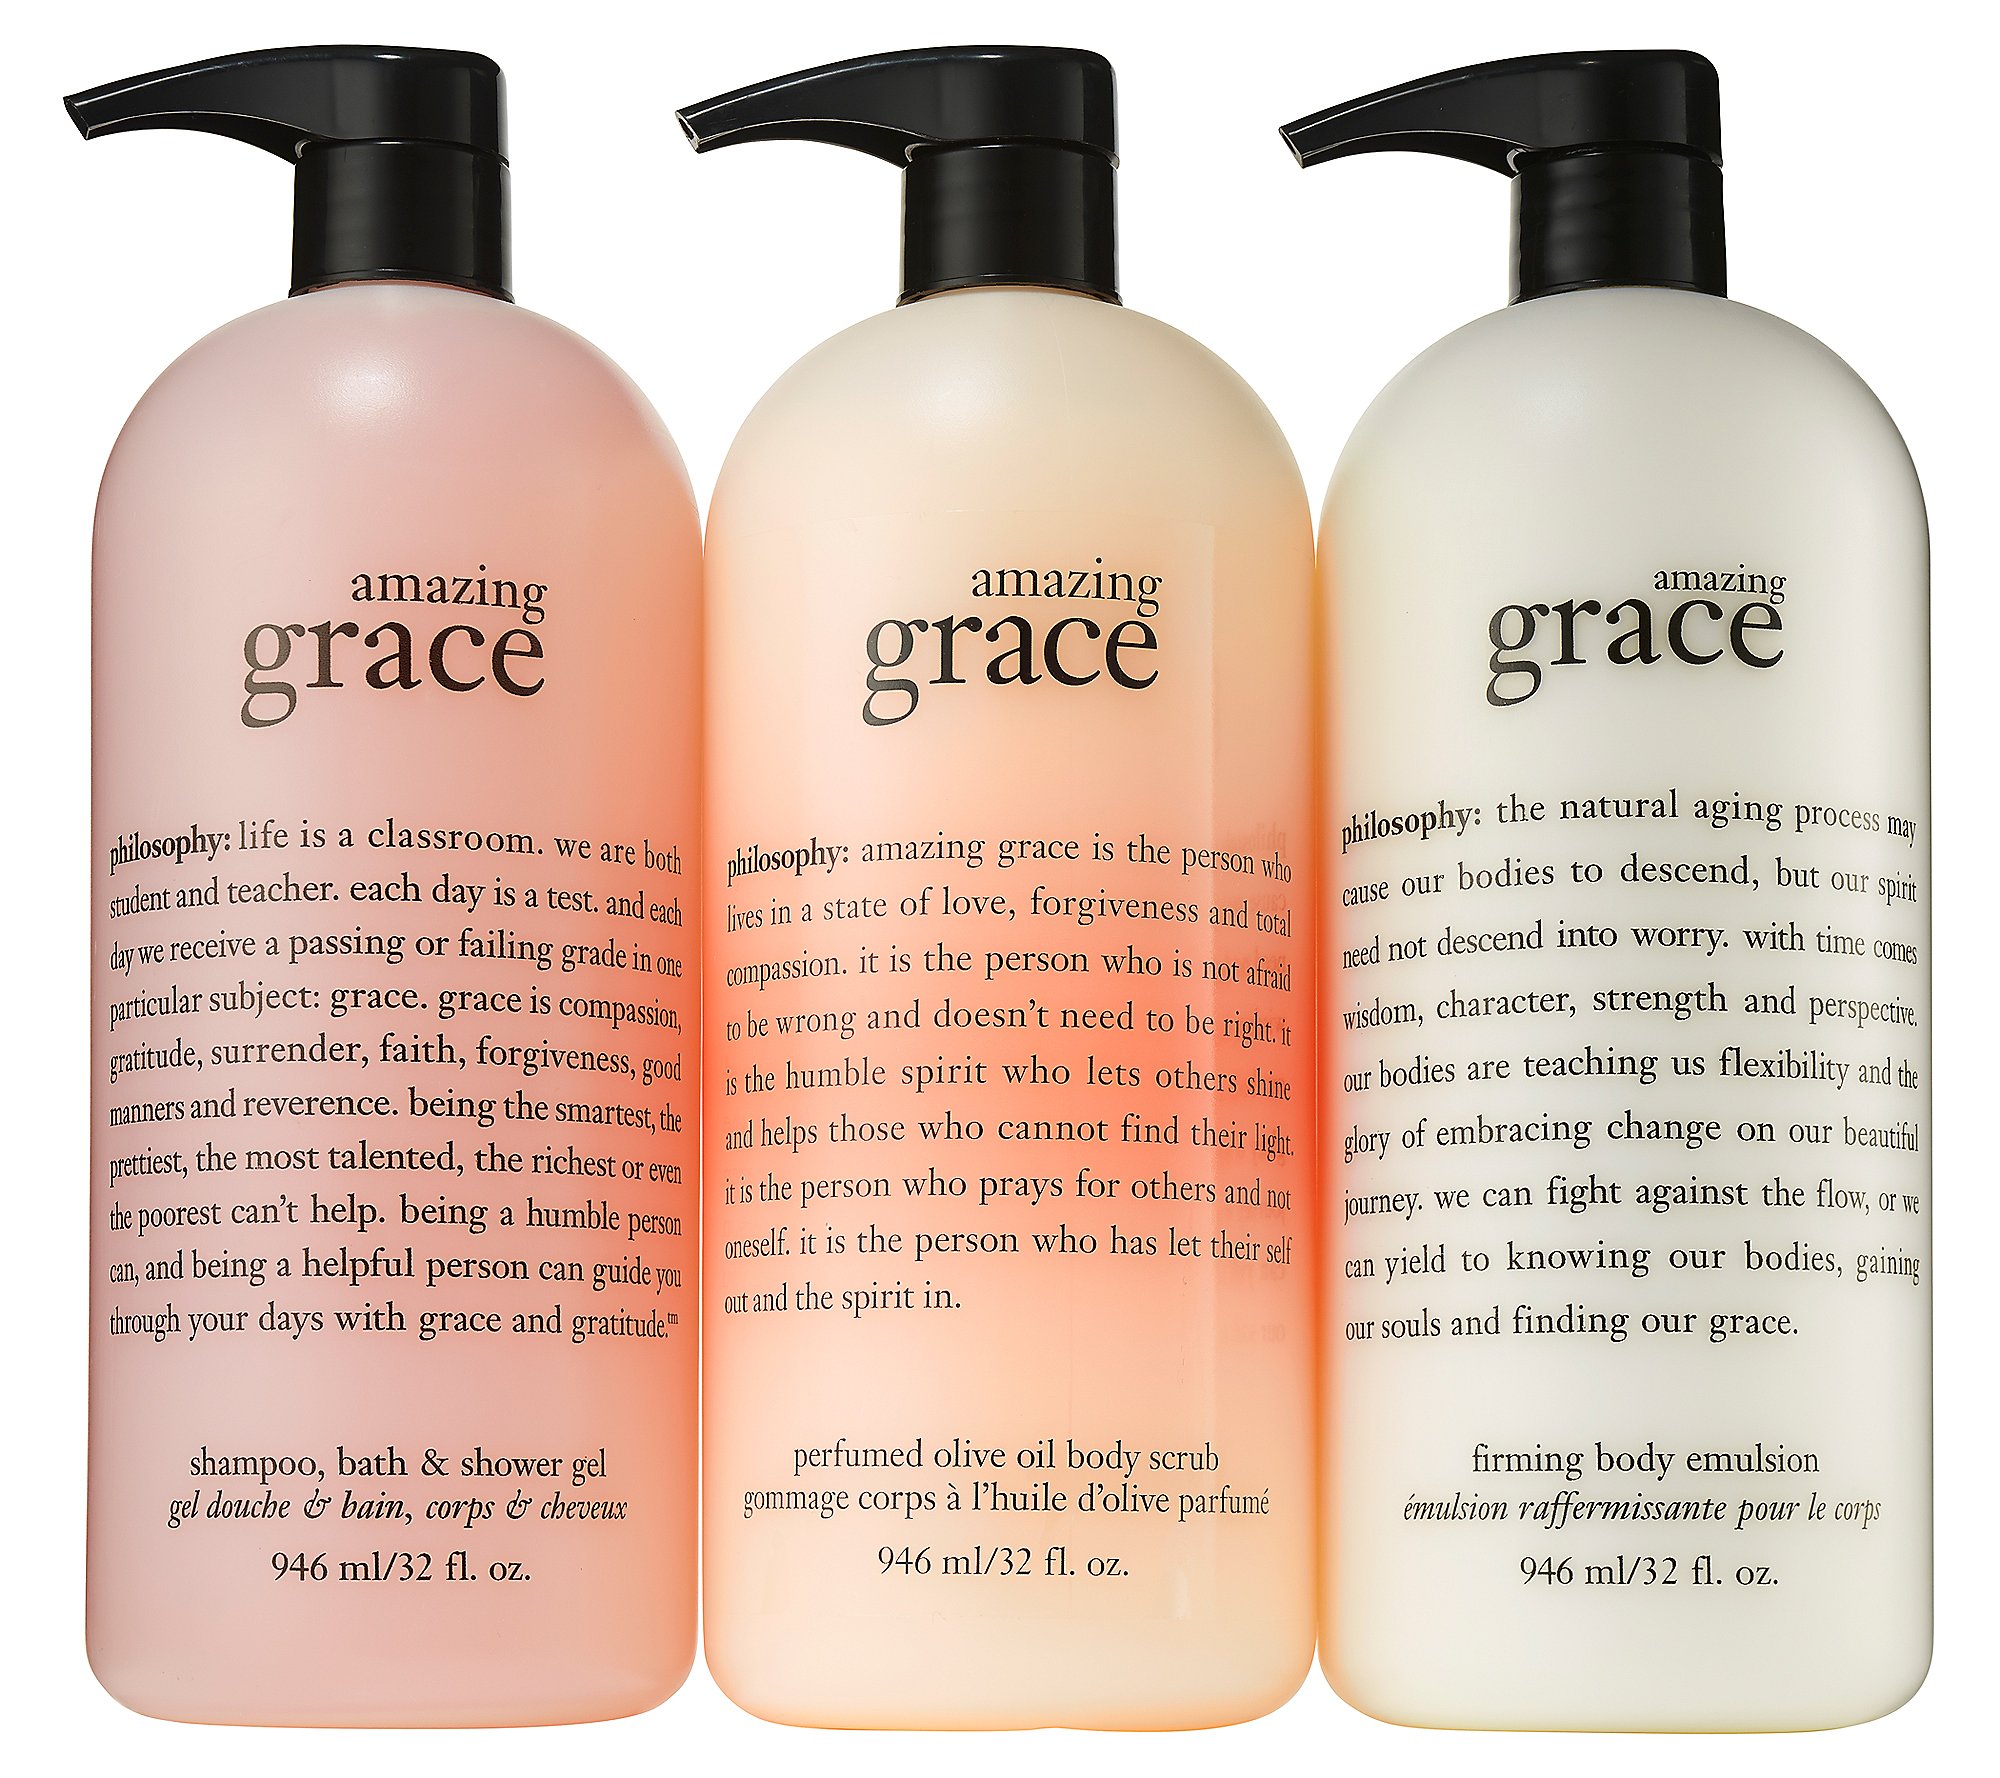 philosophy cleanse & hydrate super-size fragranced trio - QVC.com